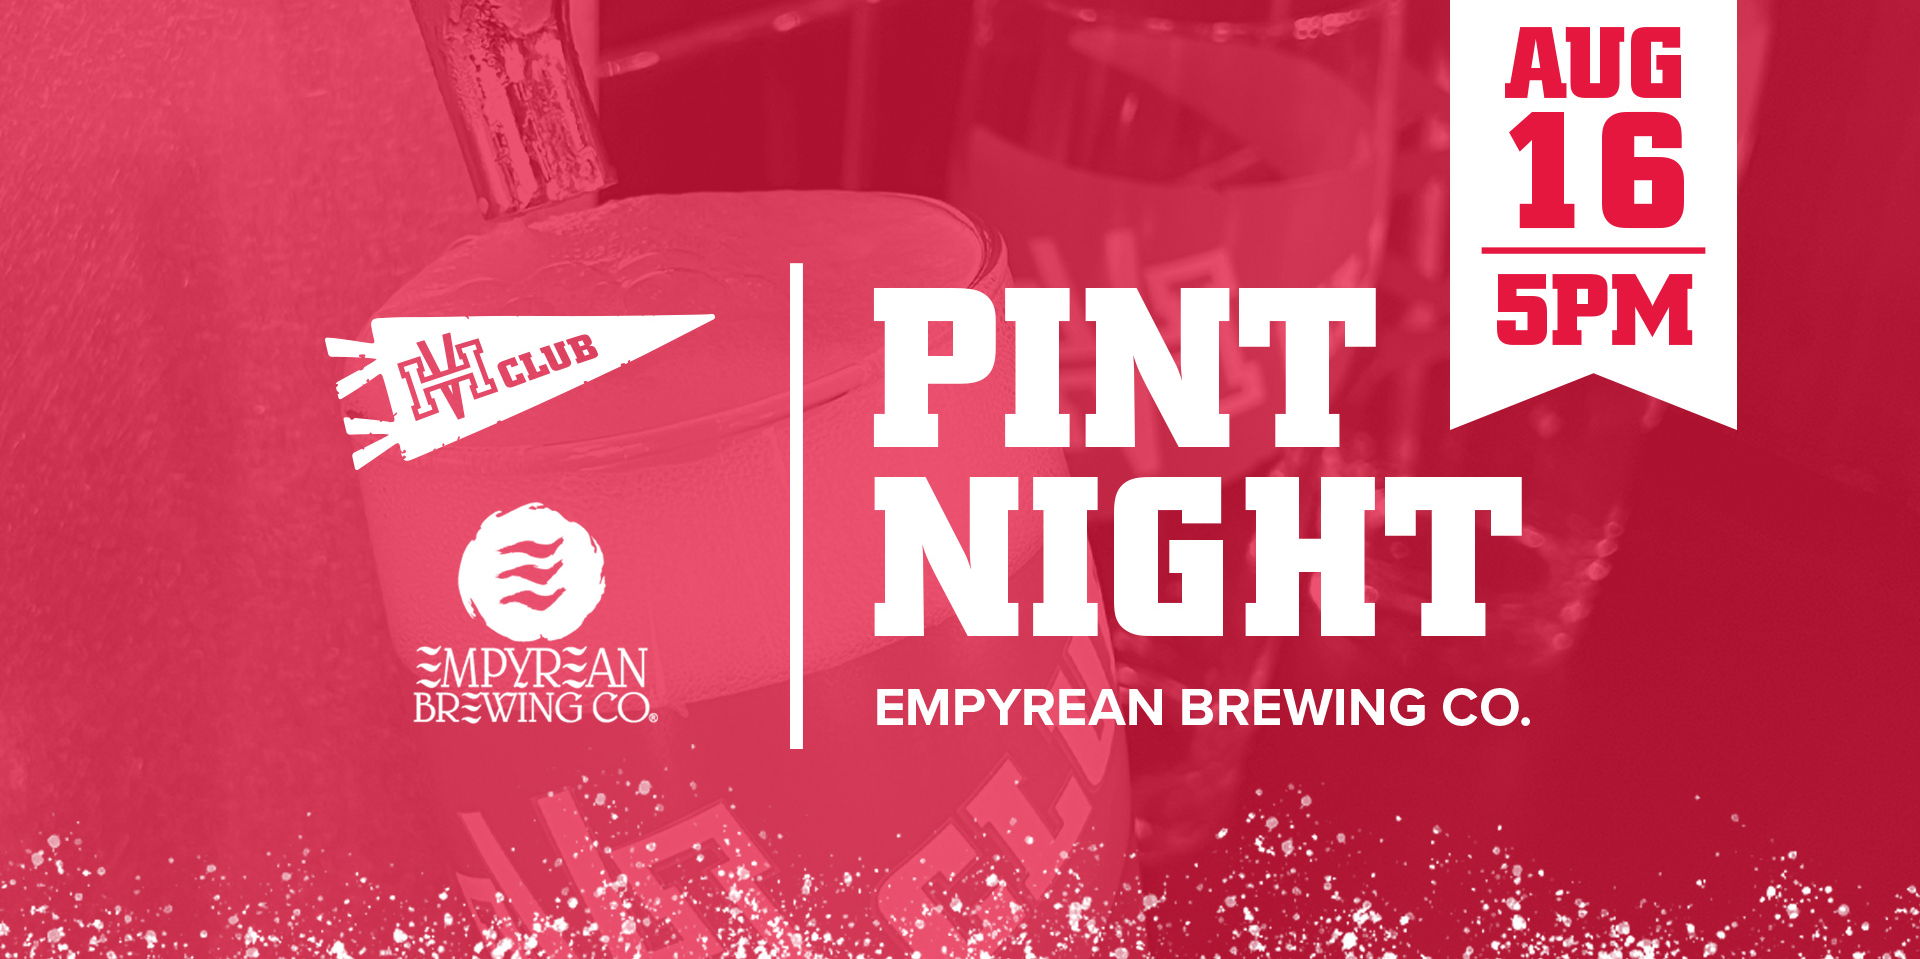 Pint Night: Empyrean Brewing Co.  promotional image